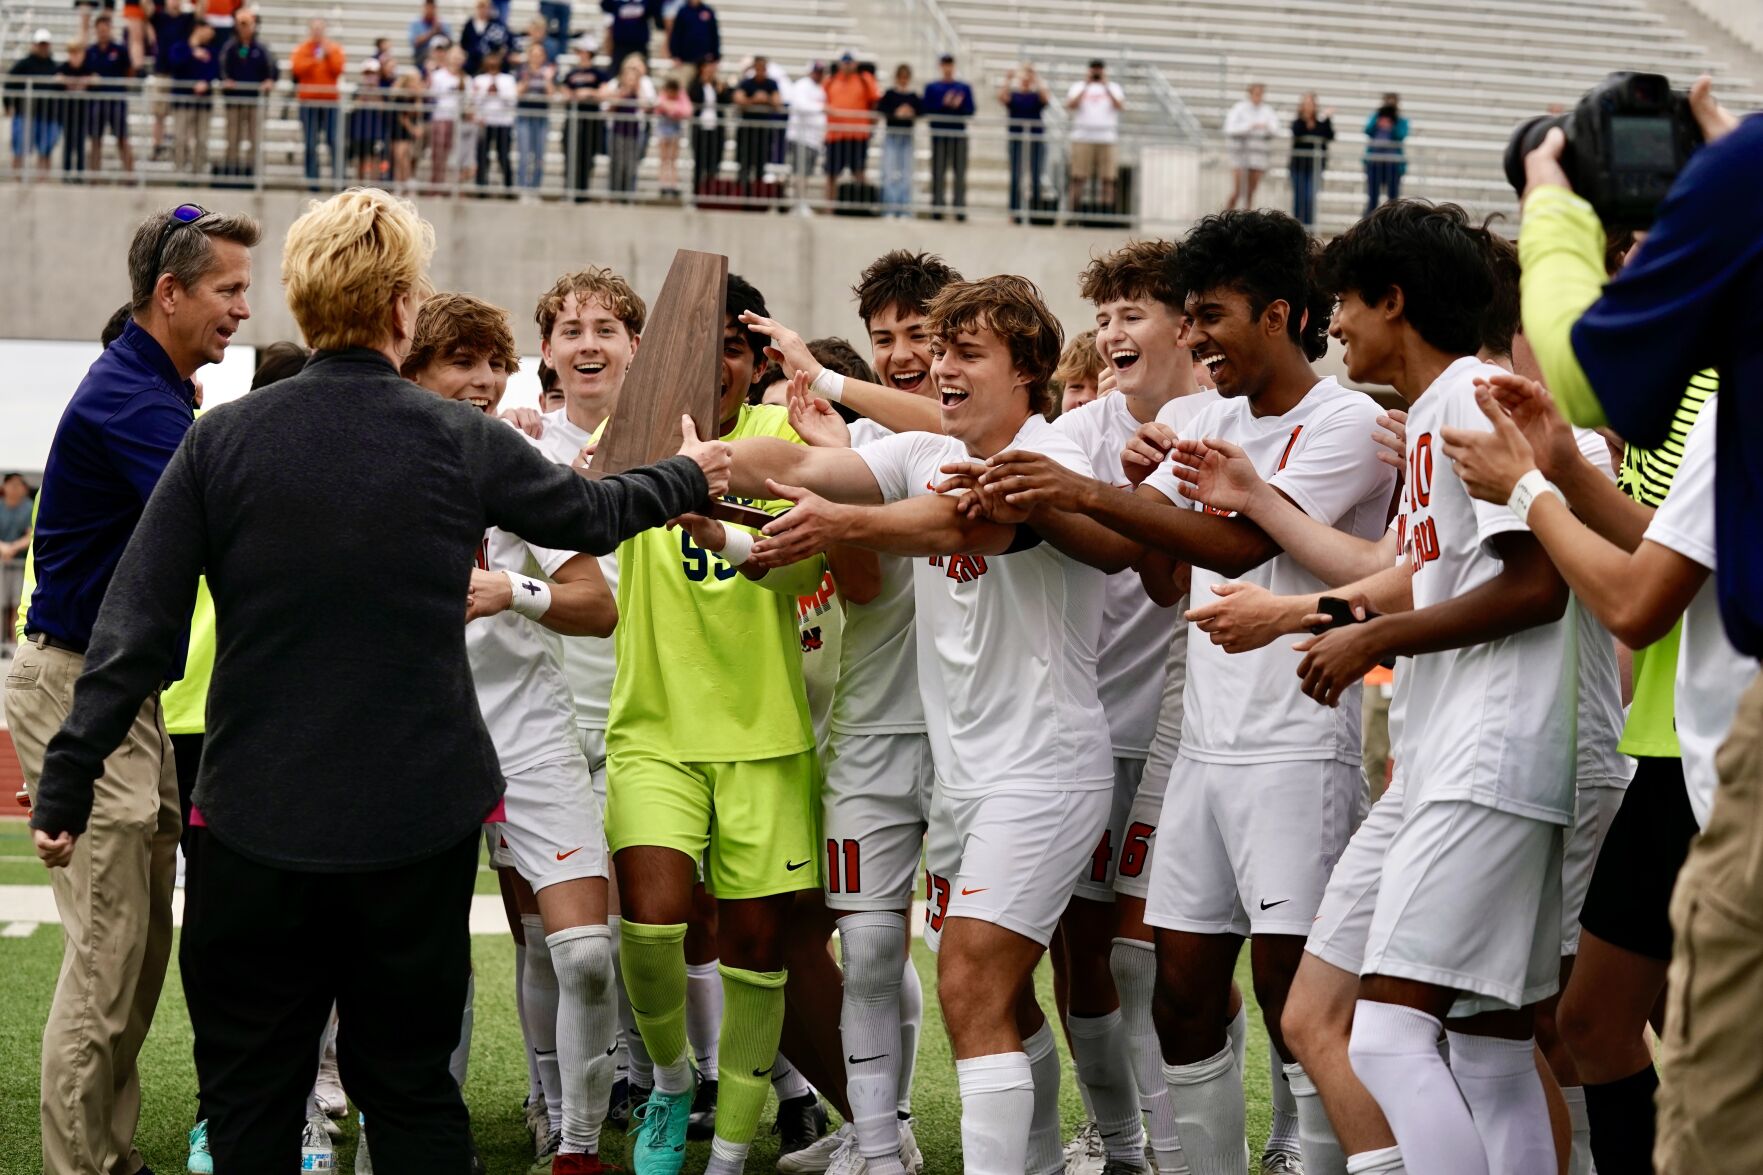 Welcome back!: Wakeland boys blank West Mesquite, advance to state tourney for 9th time